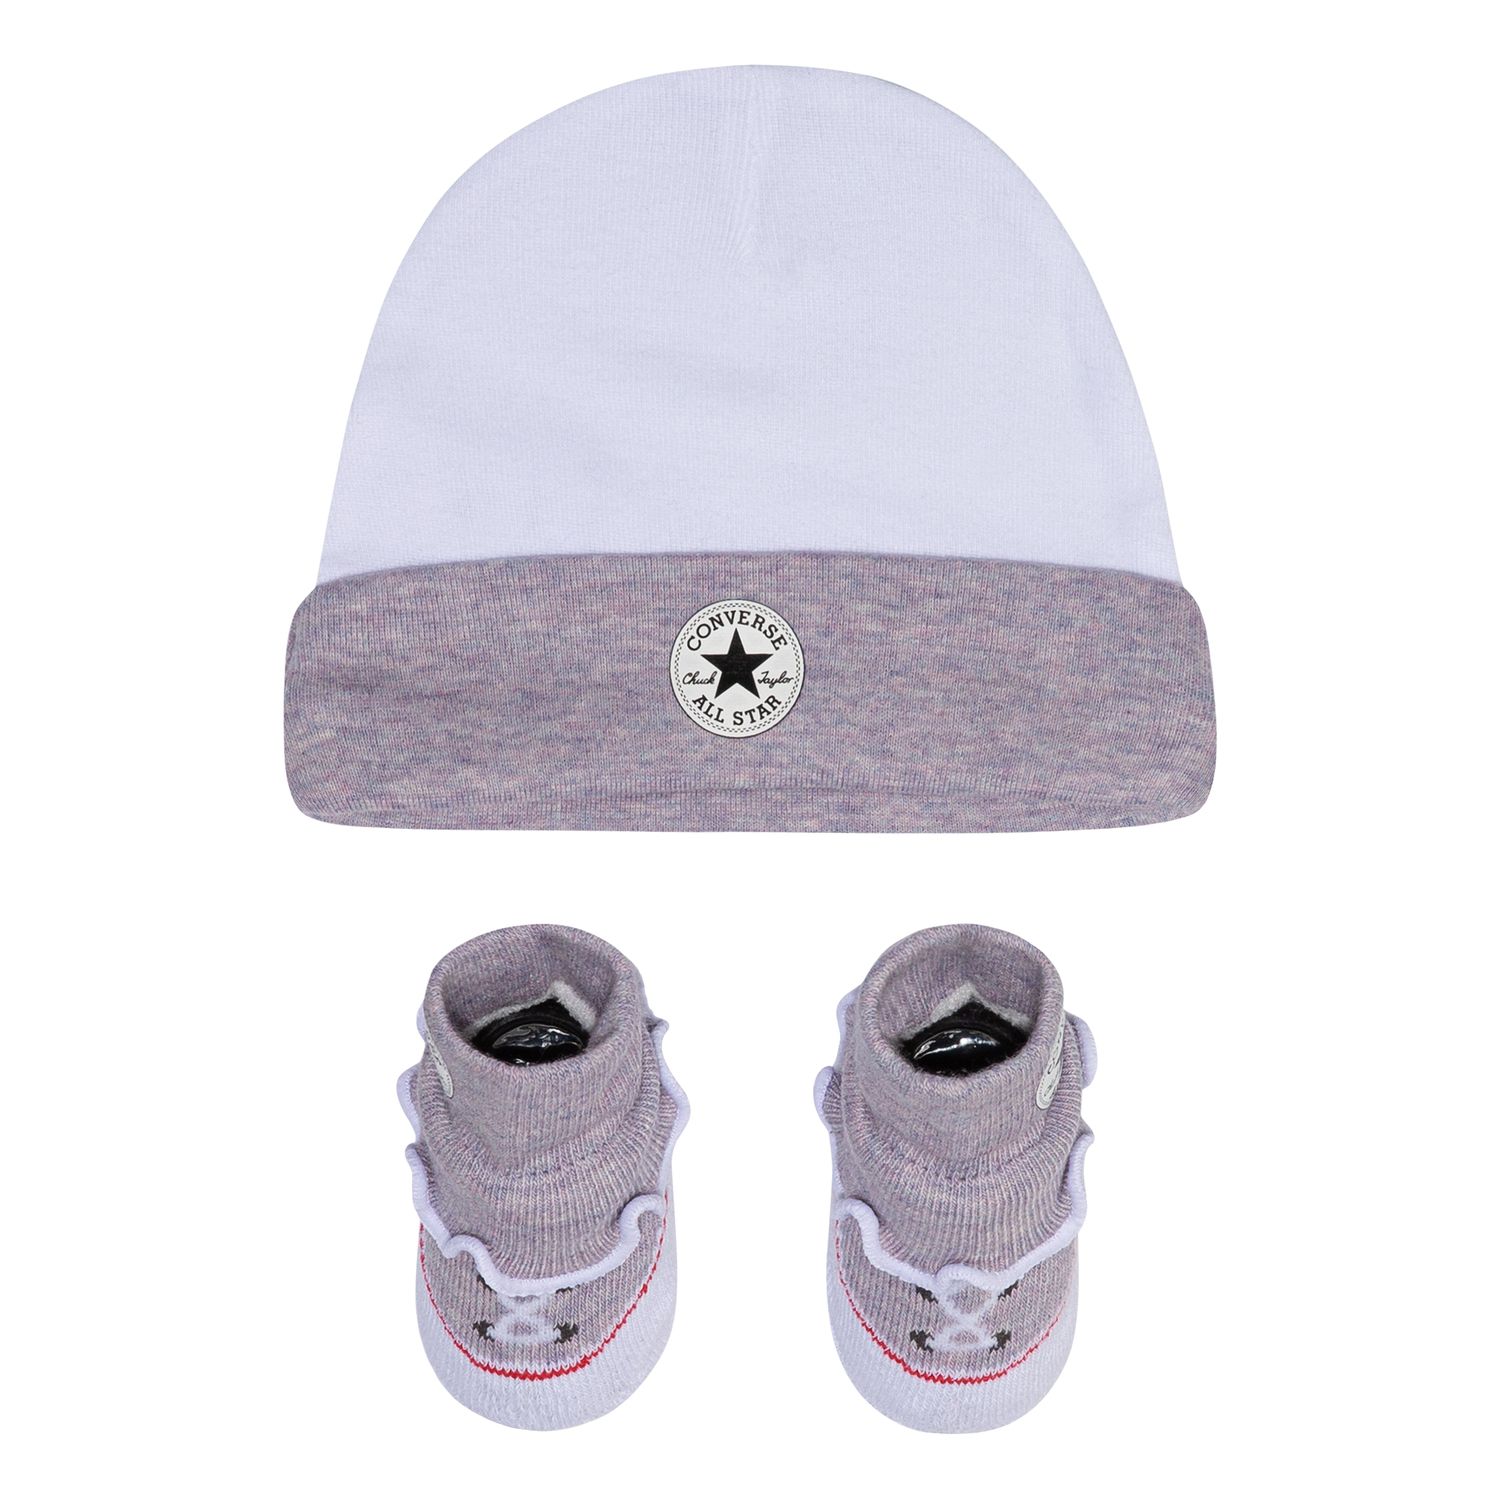 baby converse socks and hat